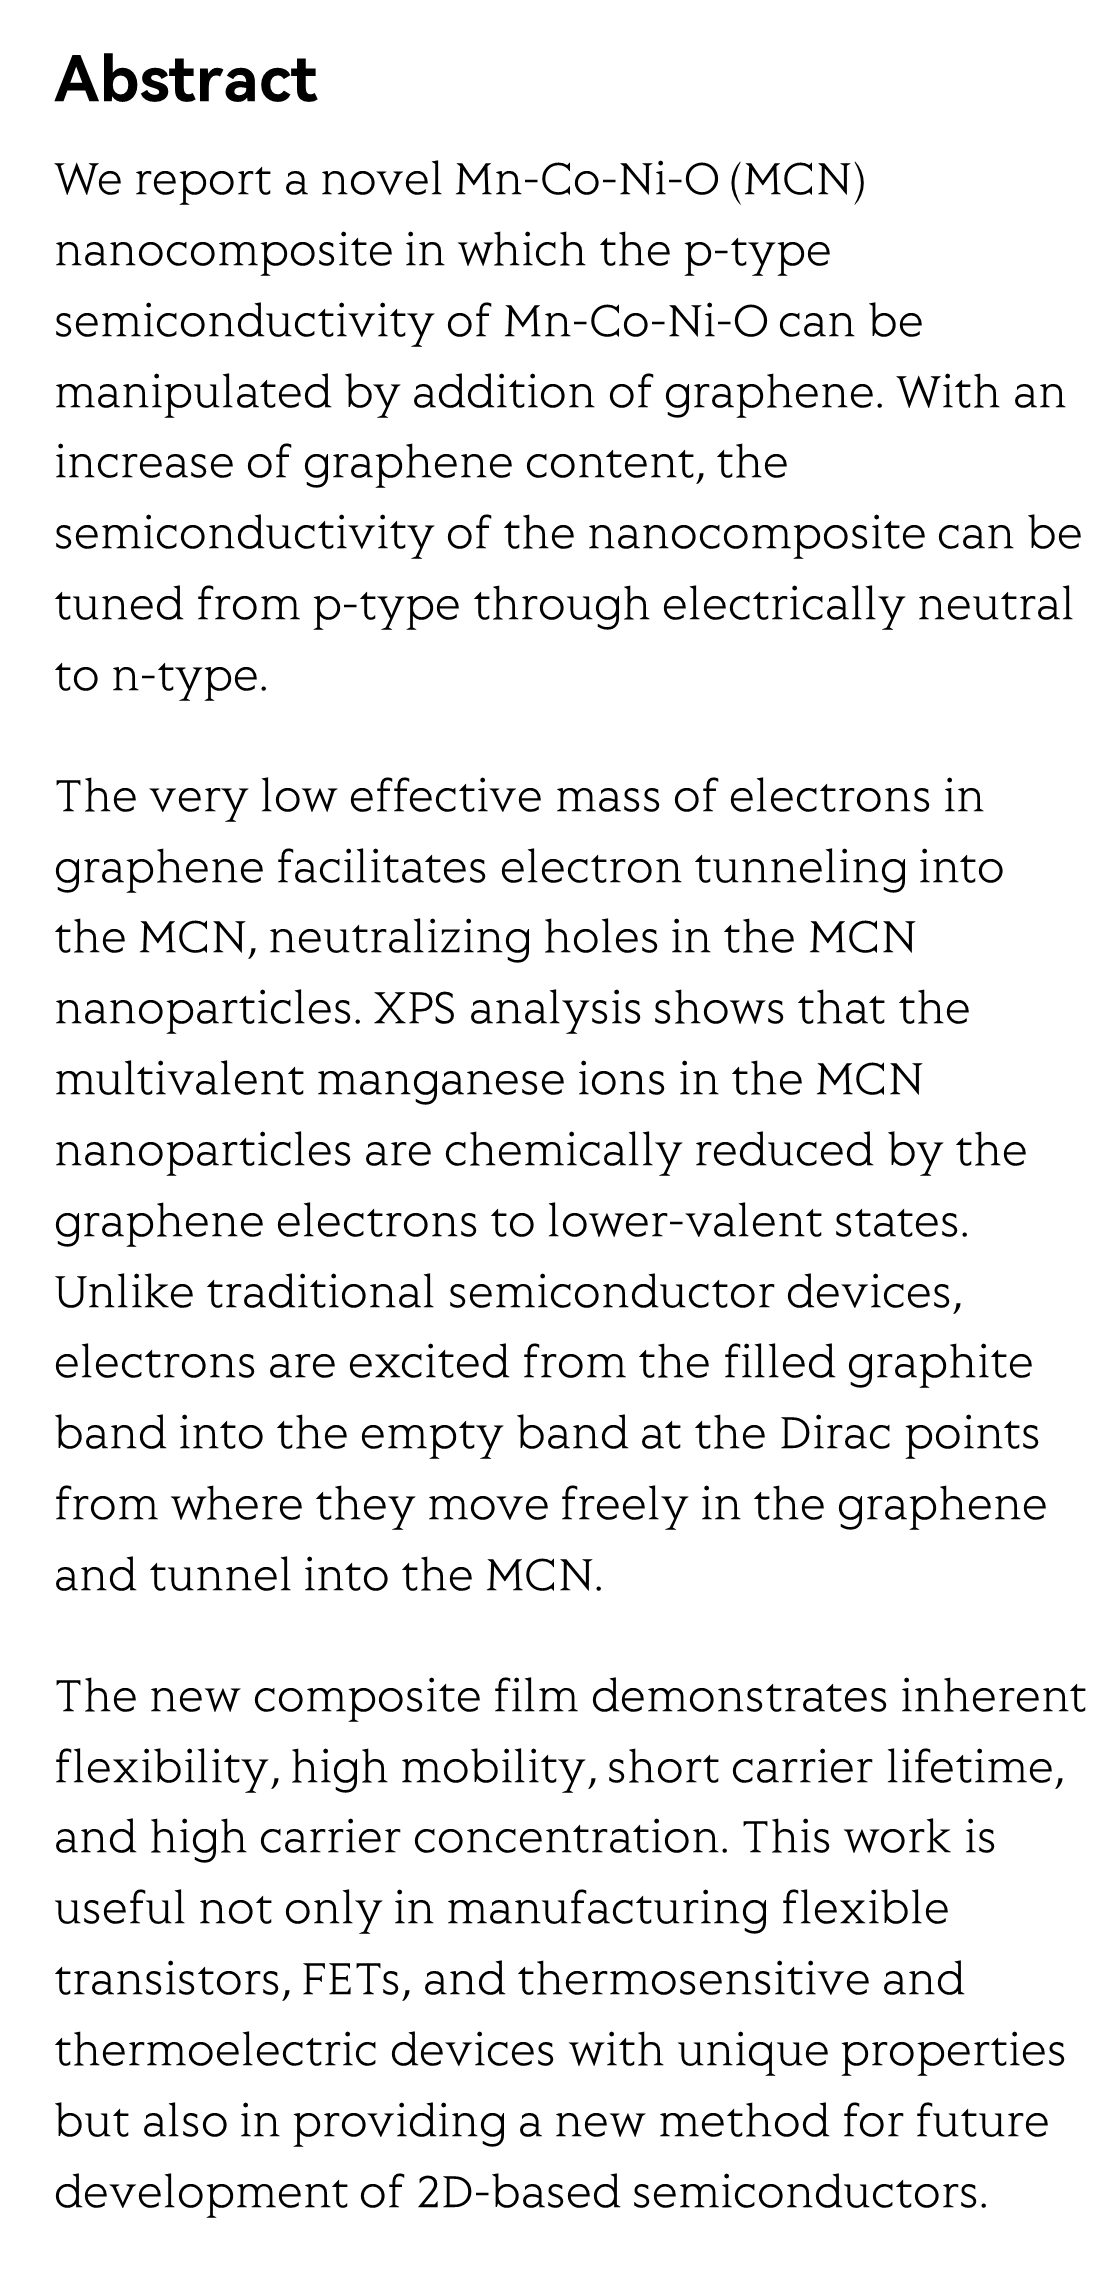 Flexible Diodes/Transistors Based on Tunable p-n-Type Semiconductivity in Graphene/Mn-Co-Ni-O Nanocomposites_2